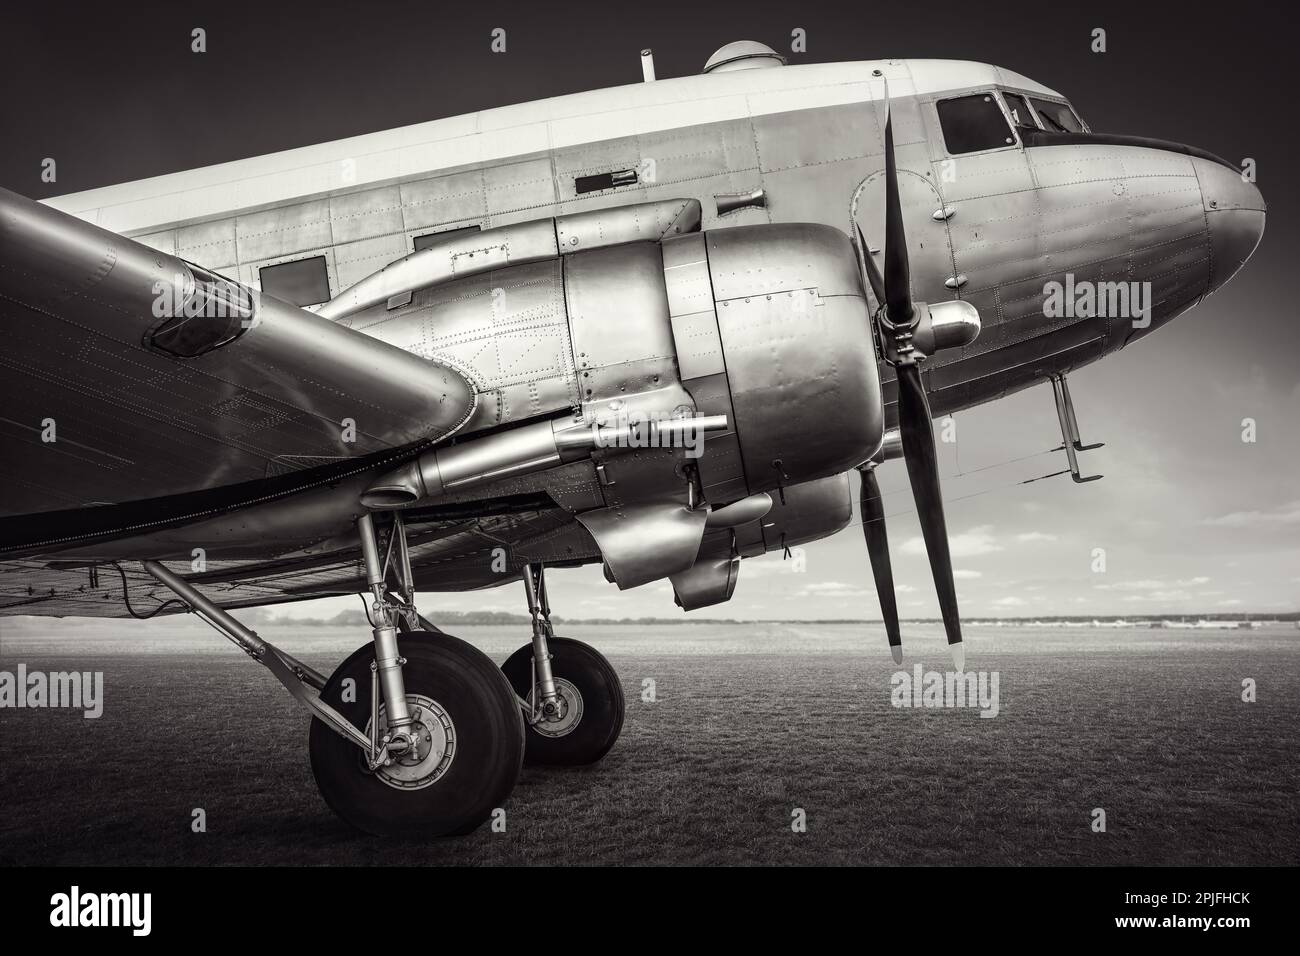 side view of an historical aircraft Stock Photo